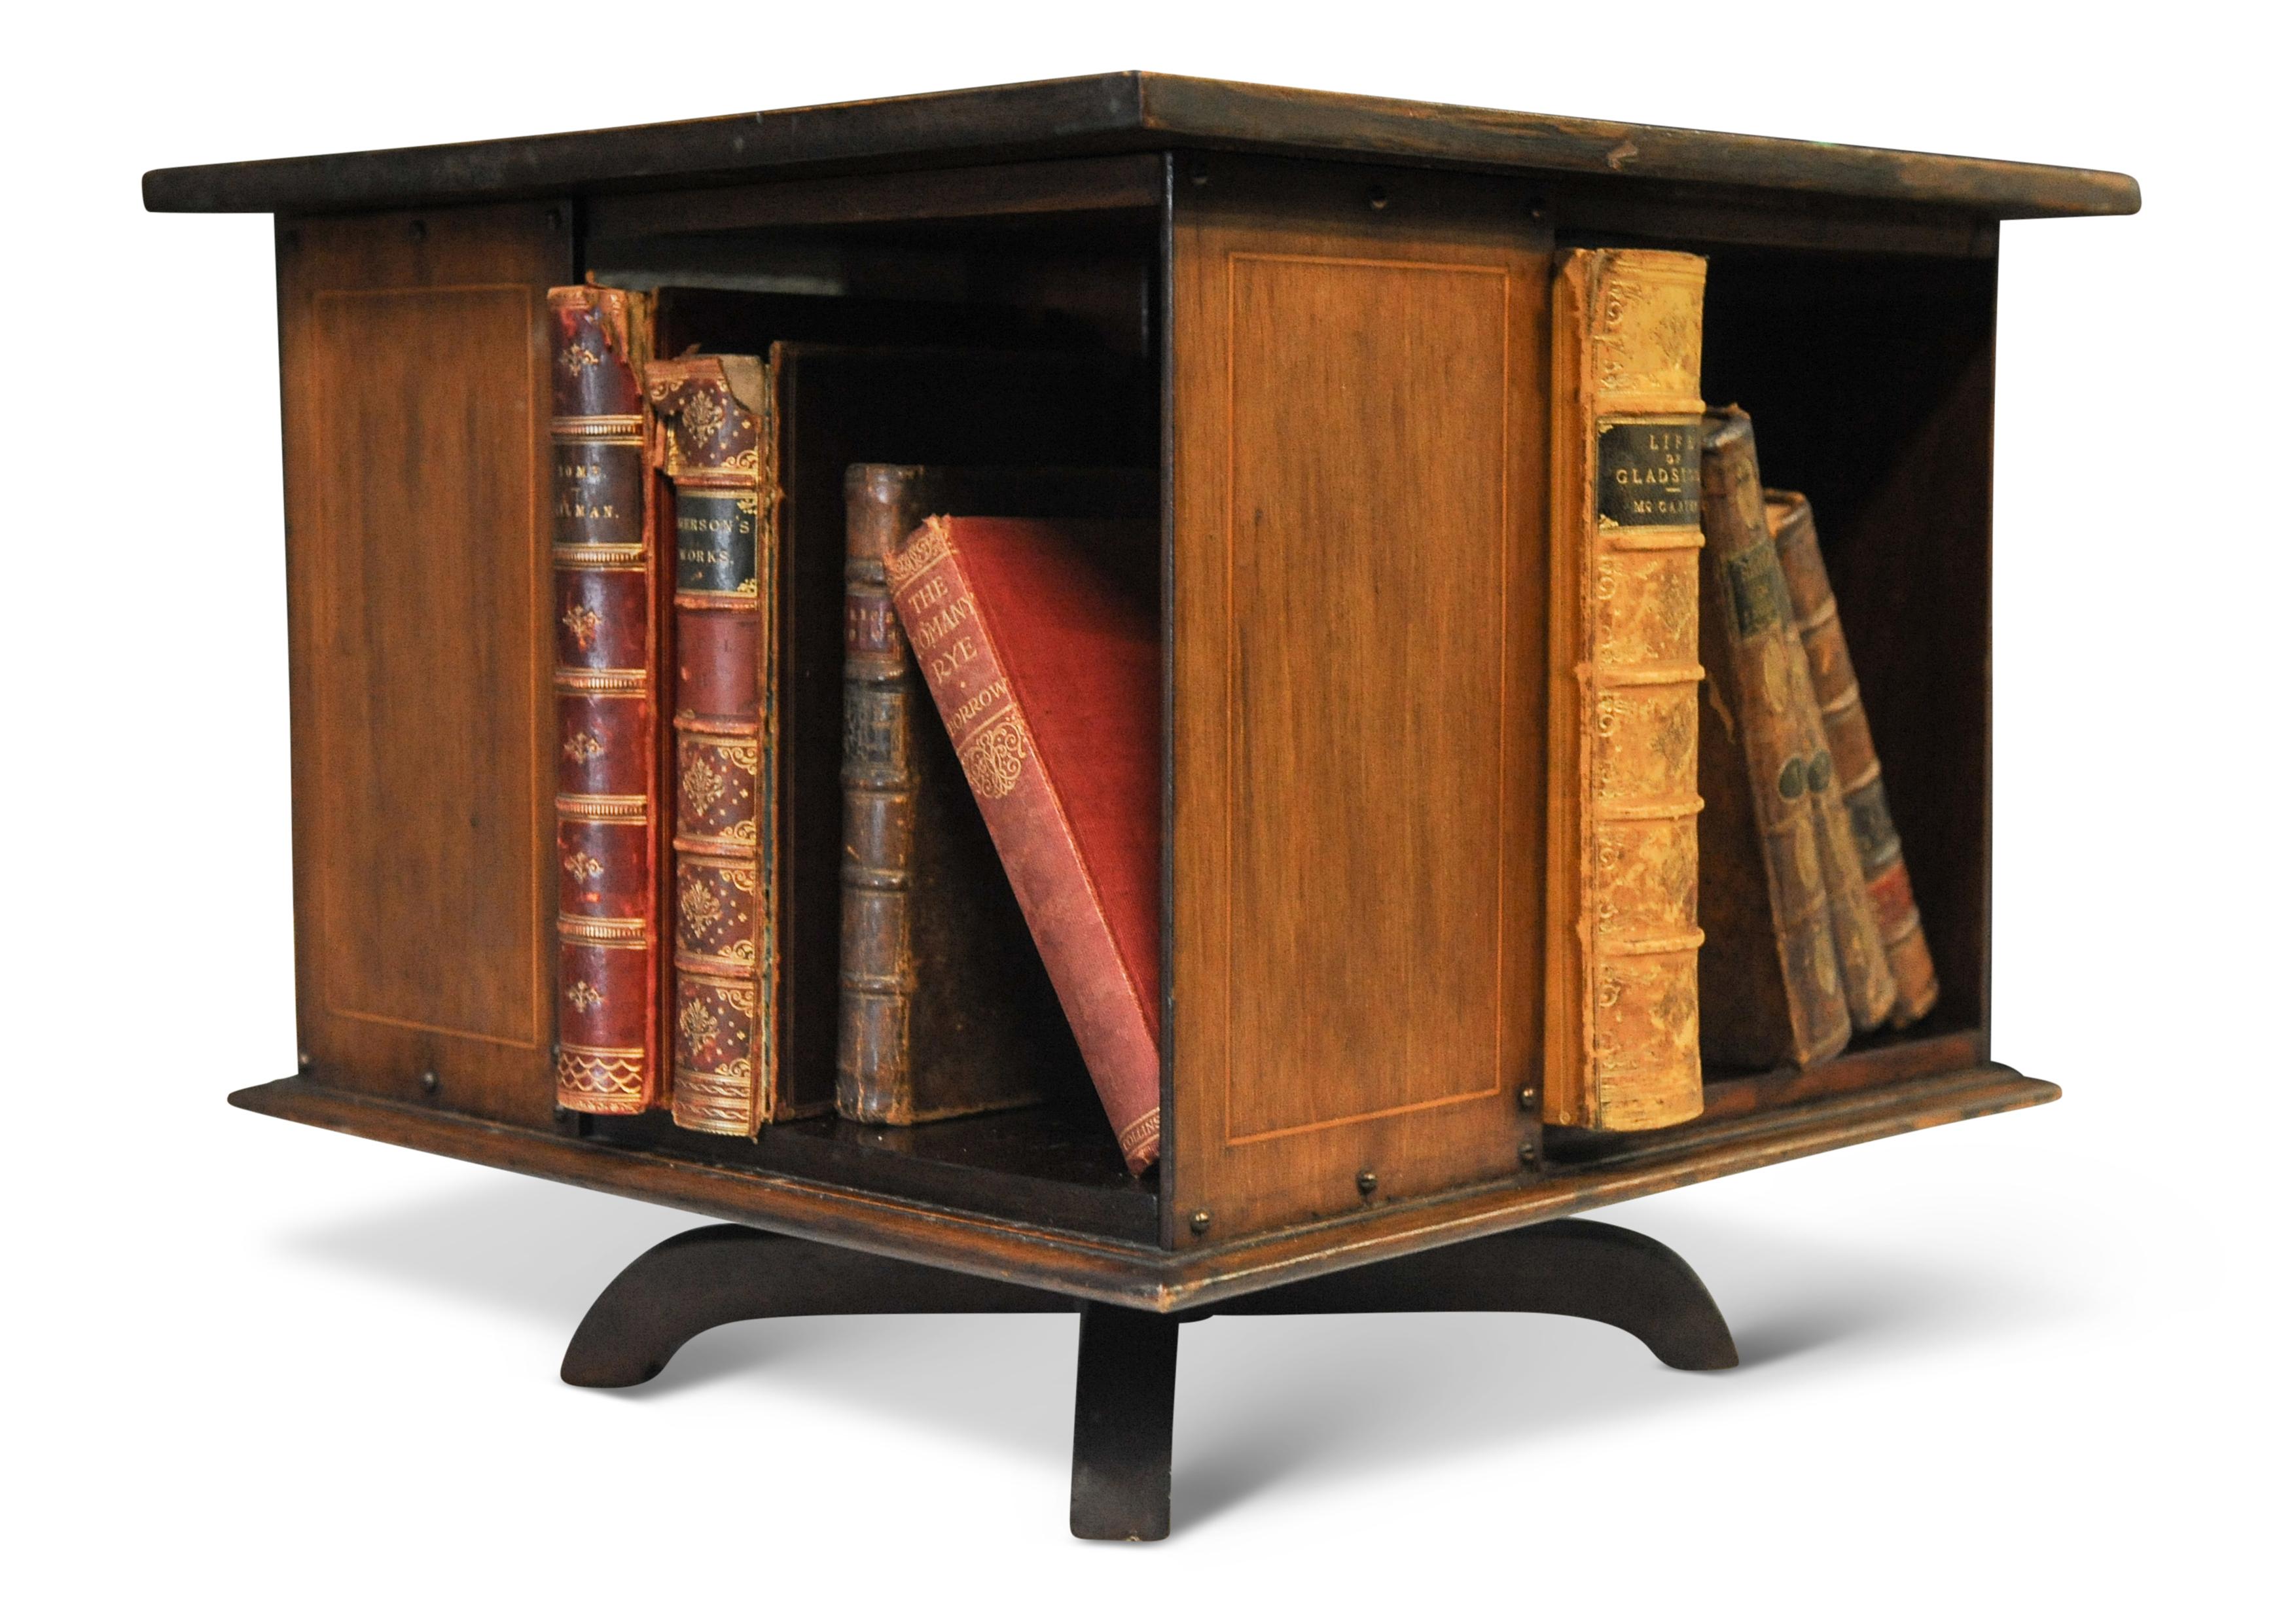 Hand-Crafted Early 20th Century Revolving Tabletop Bookcase Handmade With In-Lay Detailing For Sale